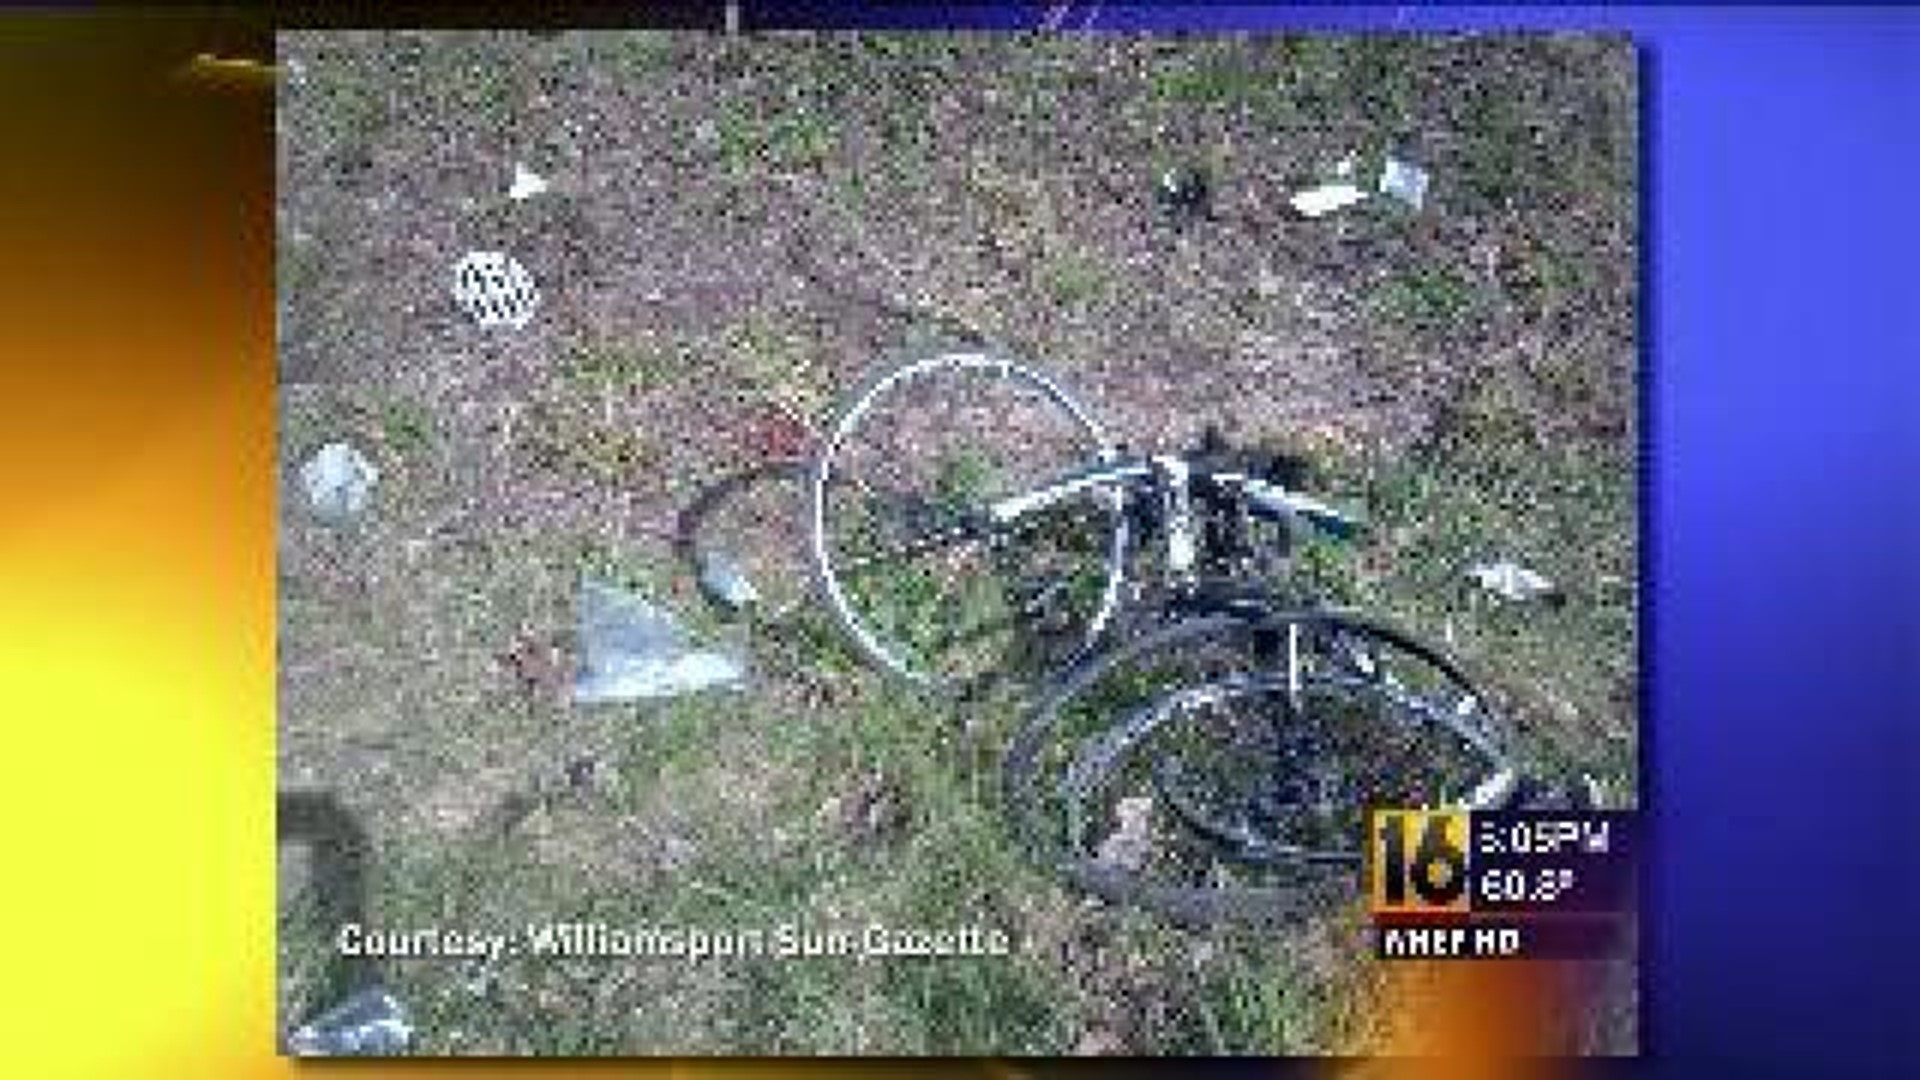 Bicyclist Struck by Vehicle; LifeFlighted